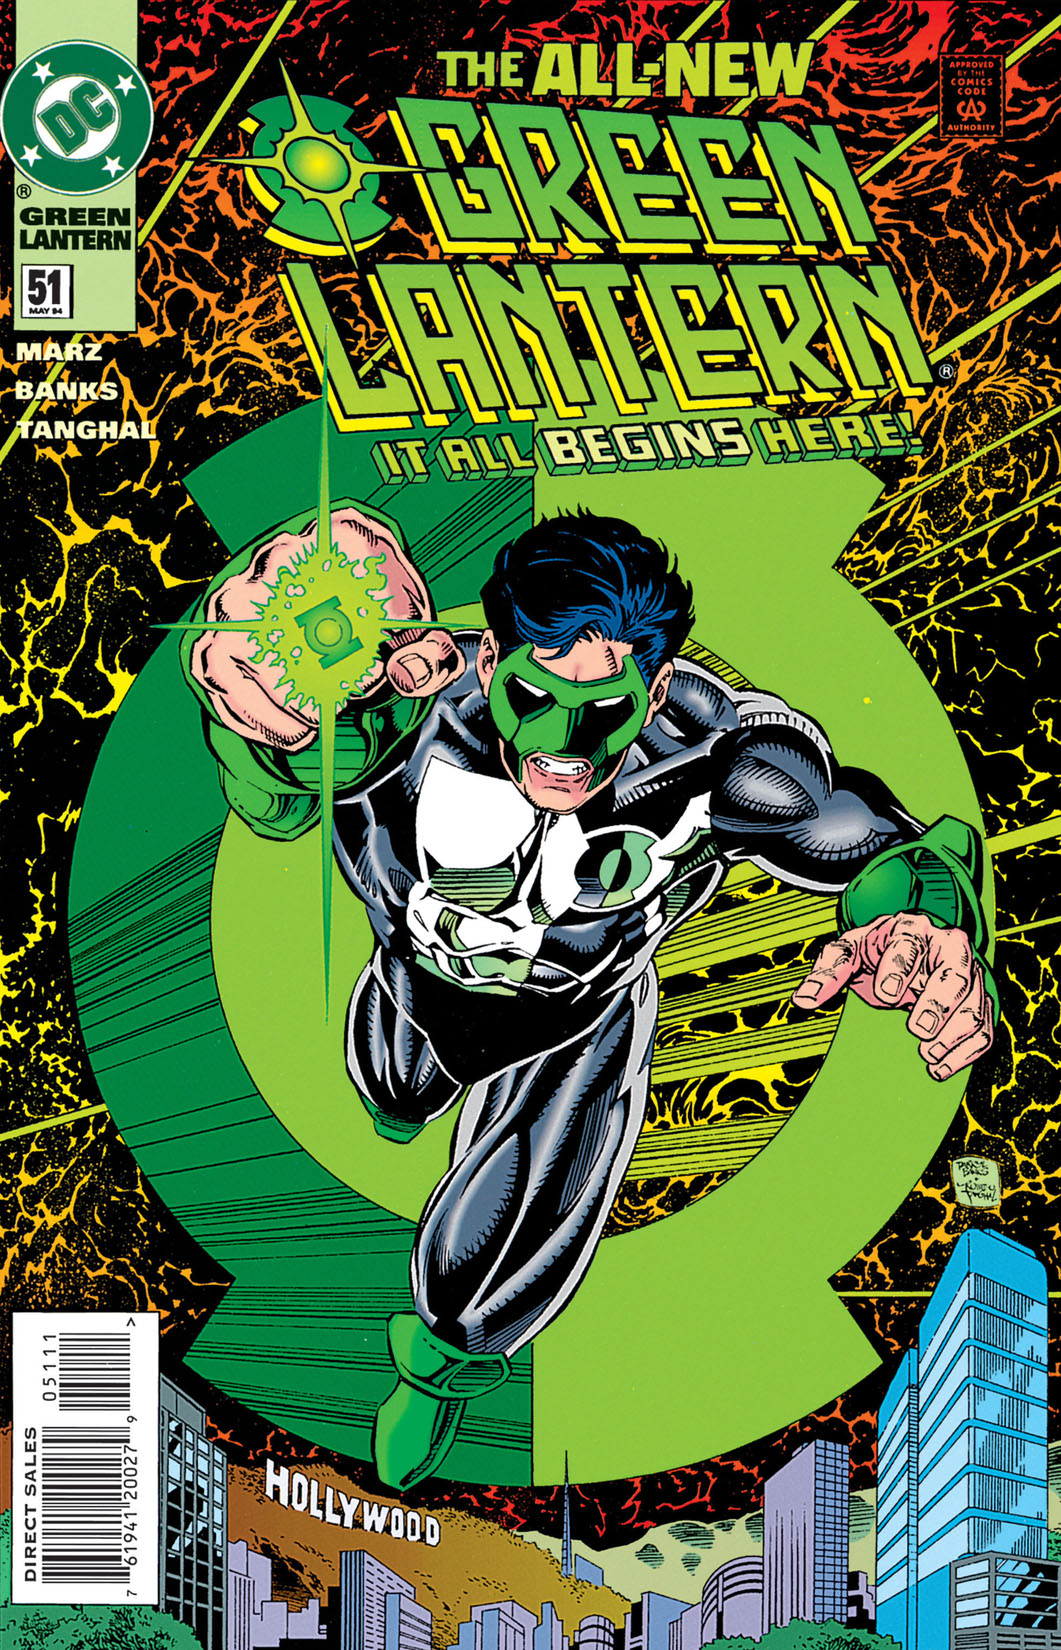 Green Lantern (1990-) #51 preview images